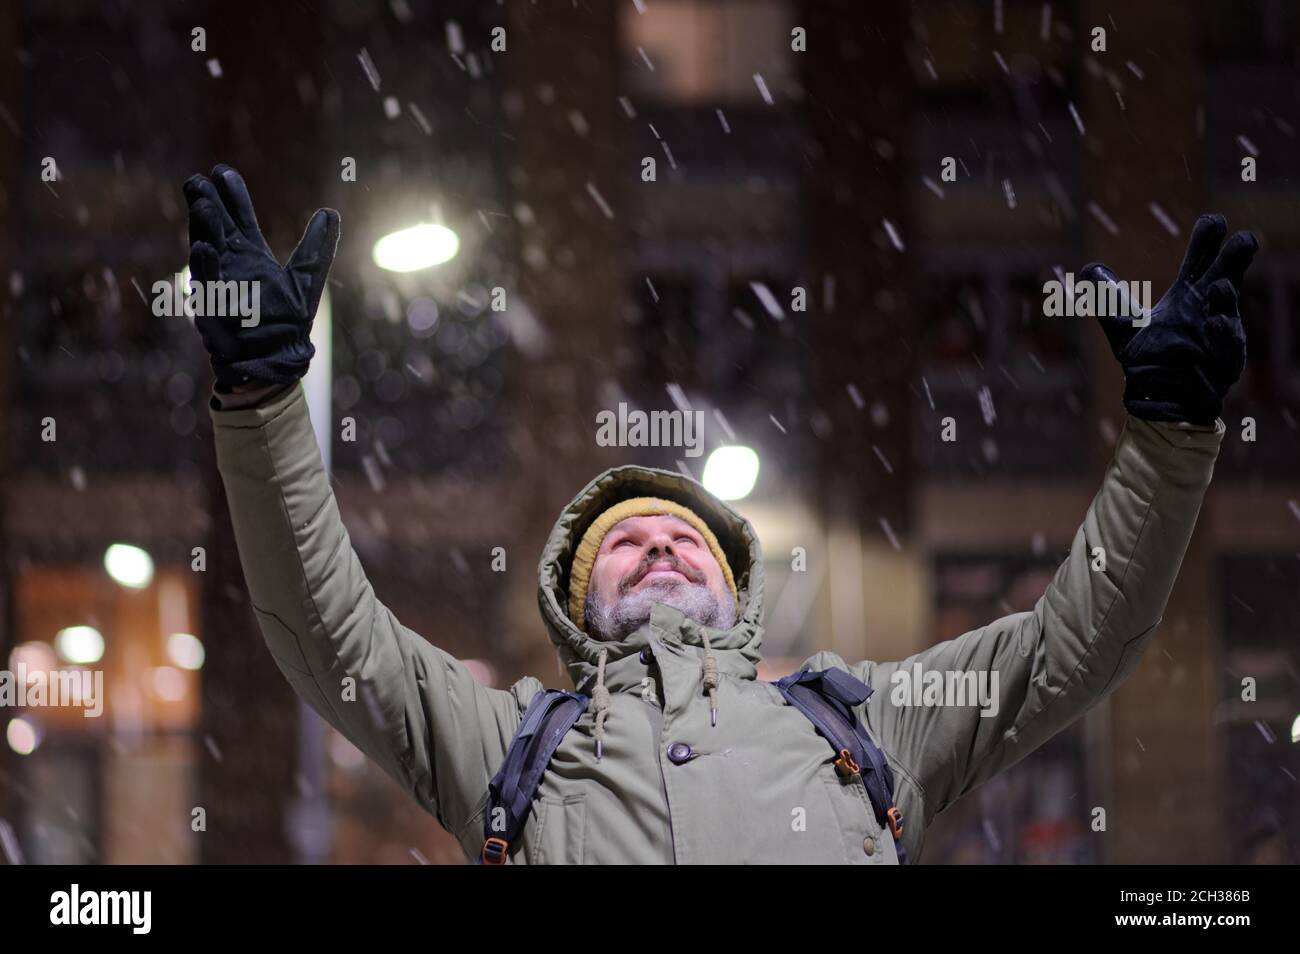 Mature Caucasian bearded man in winter jacket standing under snowfall with hands raised to the sky and looking upward Stock Photo